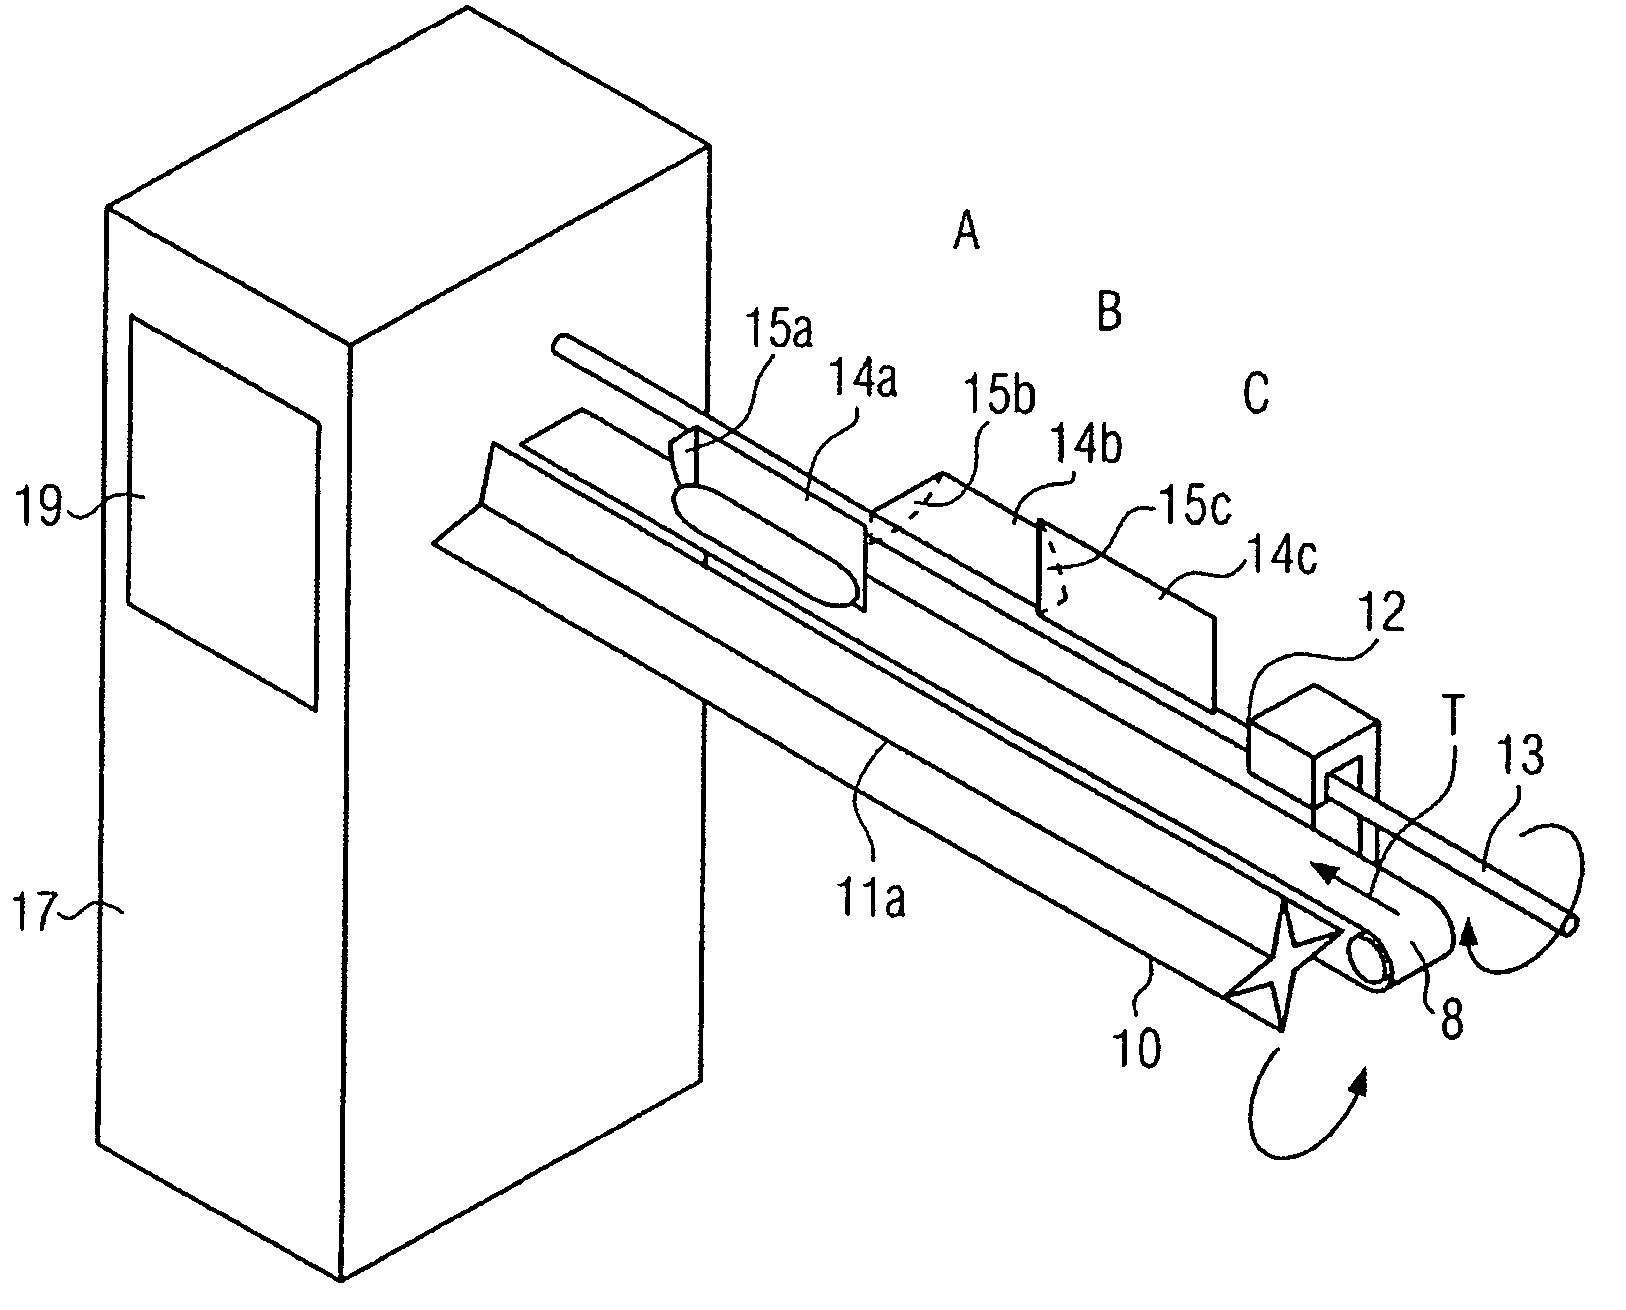 Device and method for the ordered deposition of parted sausage portions